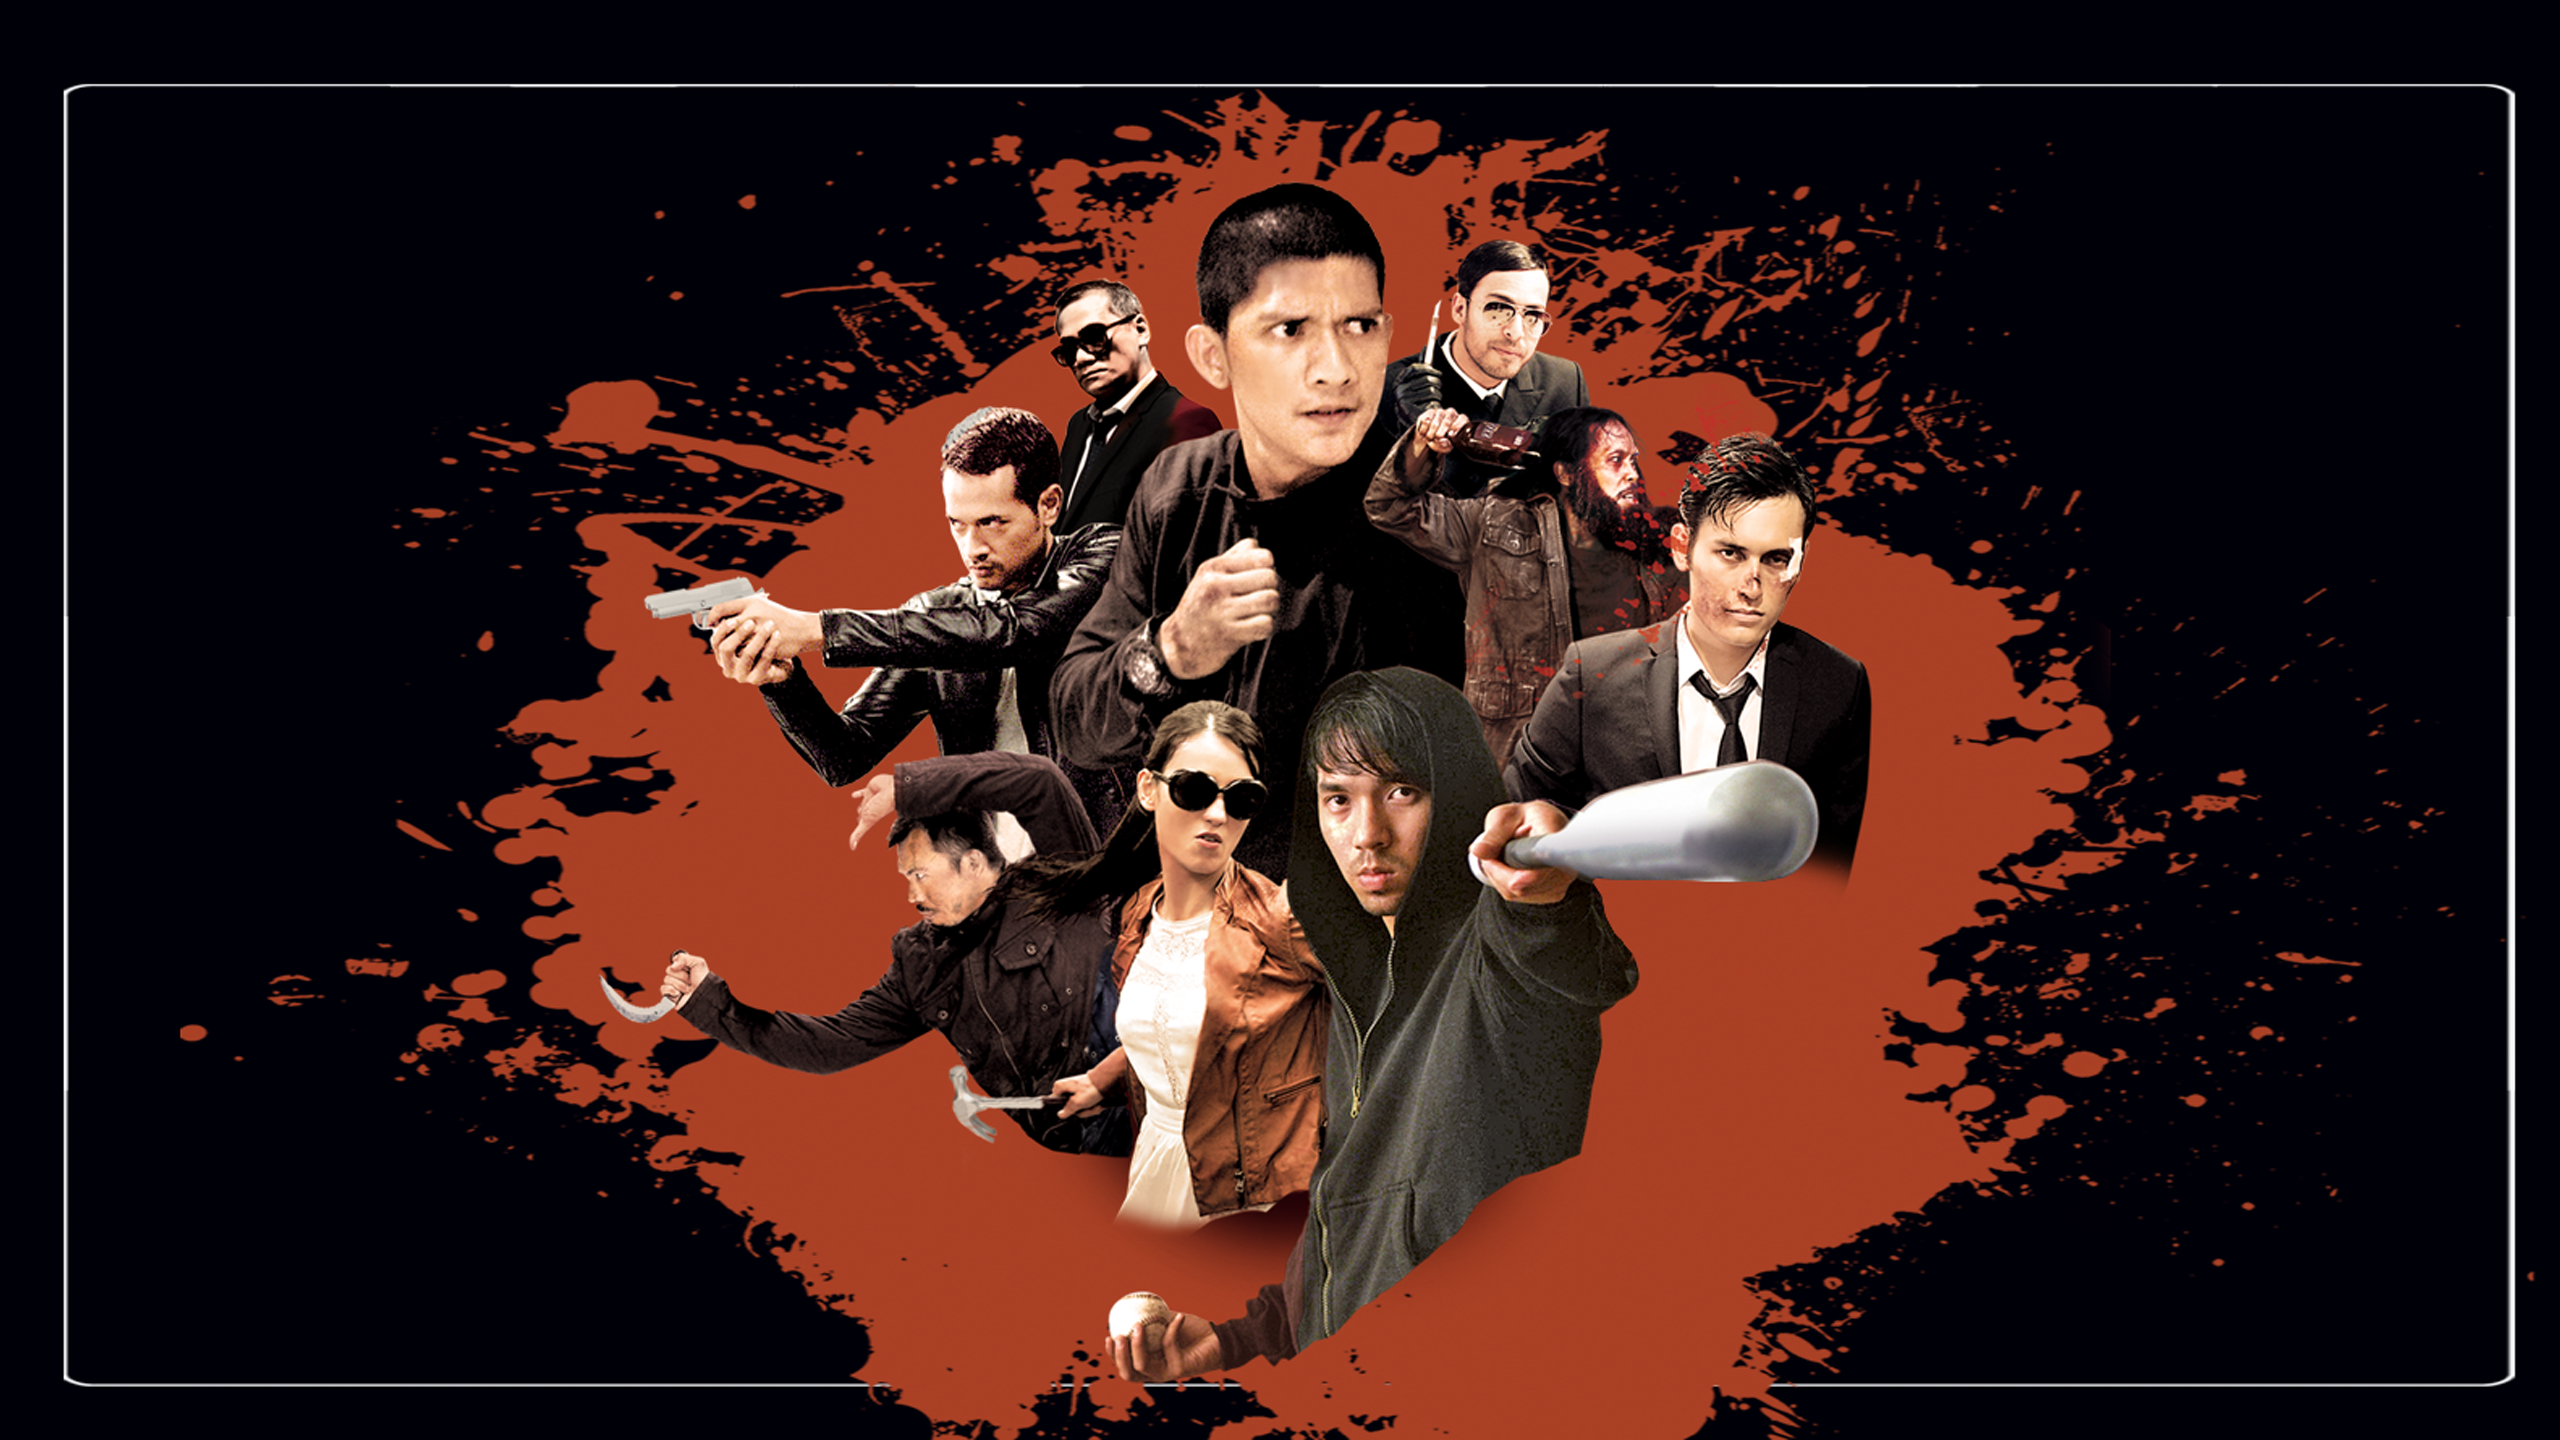 the raid 2 movie online with closed captions